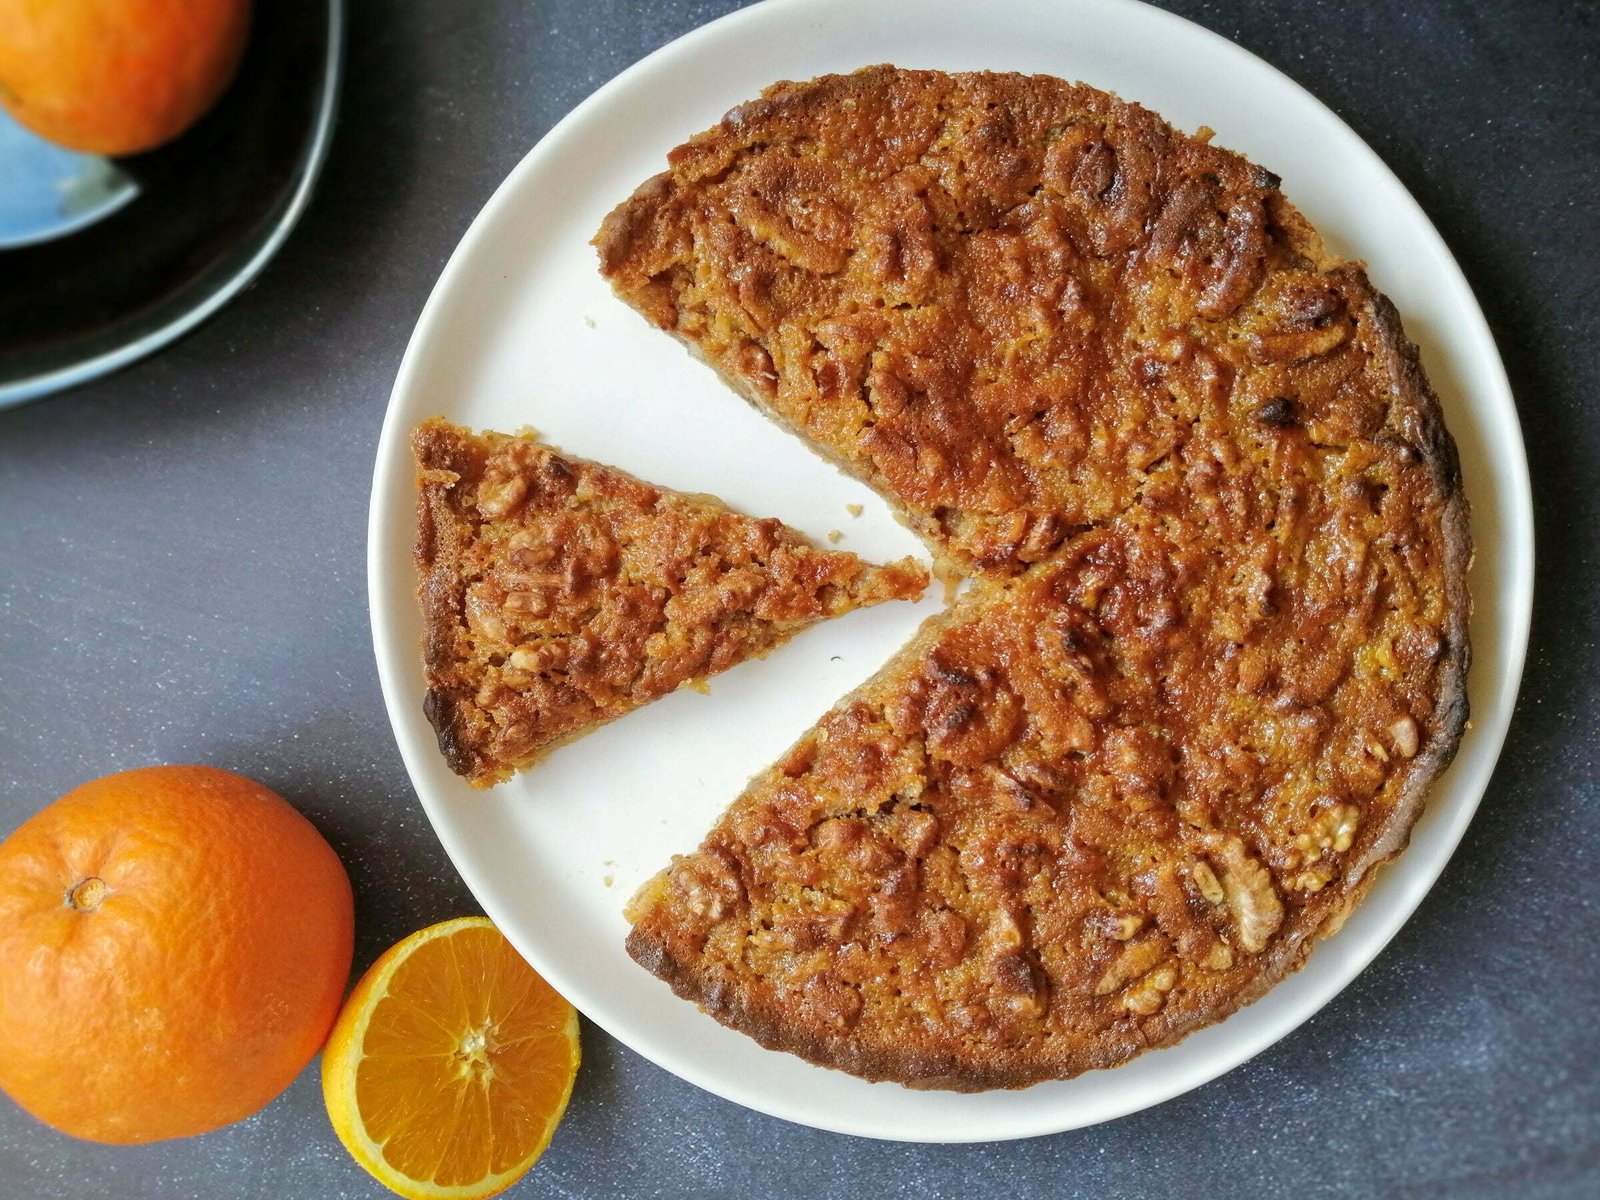 A large Walnut tart with orange and honey-infused salted caramel sits on a white plate with some oranges placed nearby